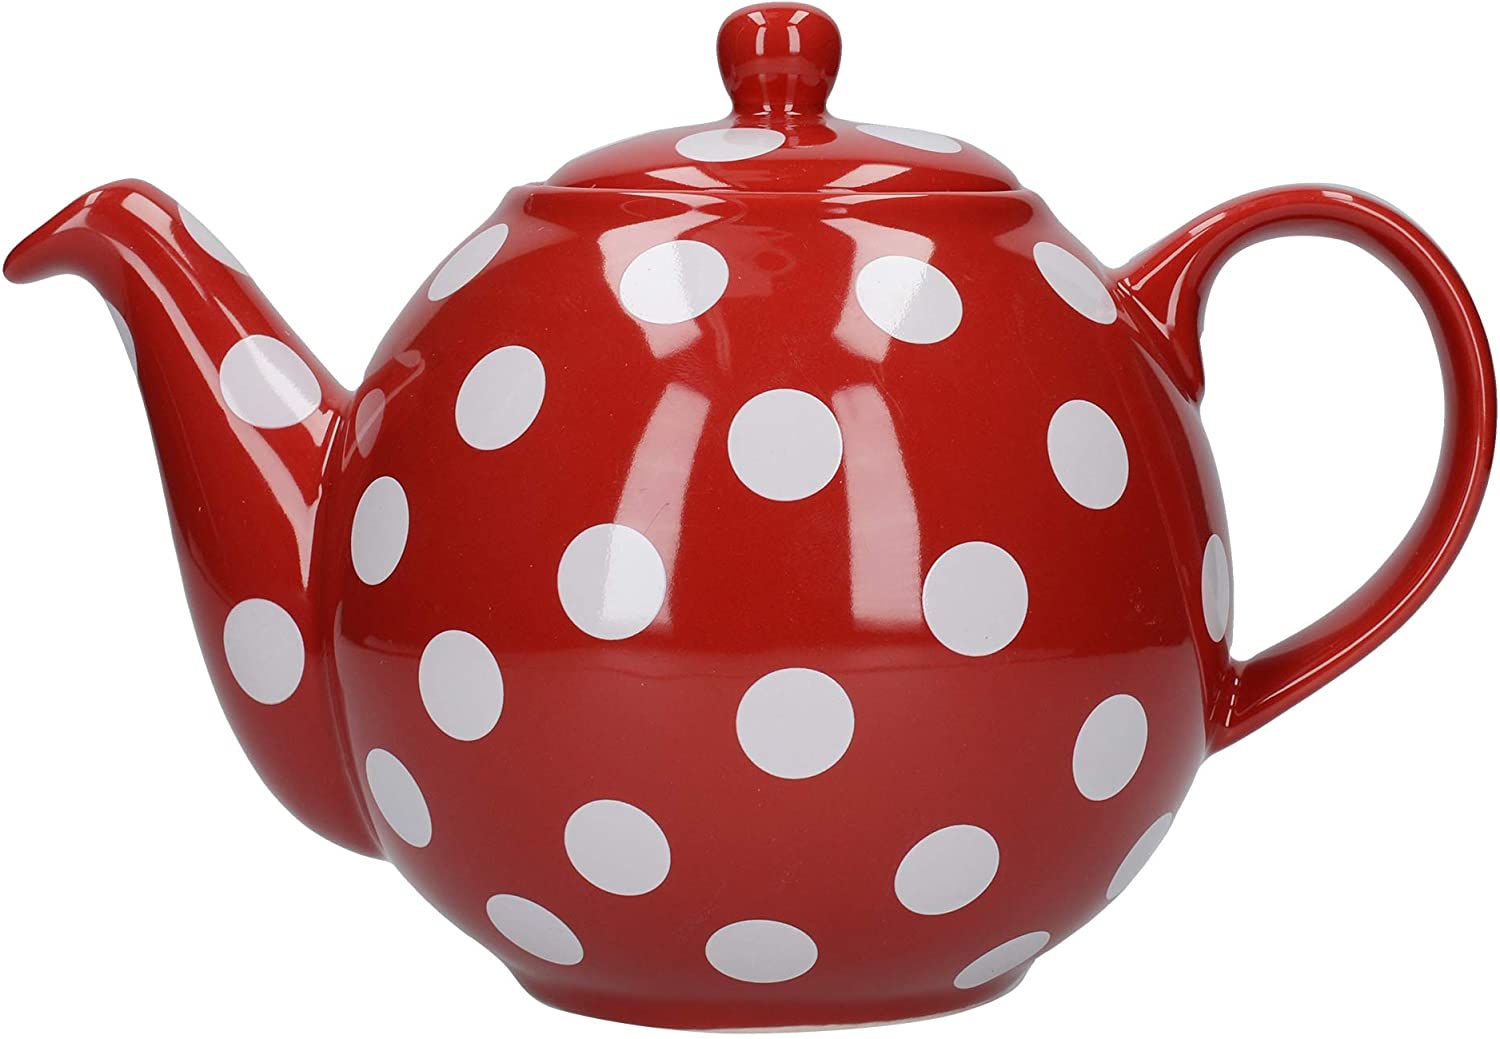 London Pottery 4 Cup Globe Teapot, Red with White Spots